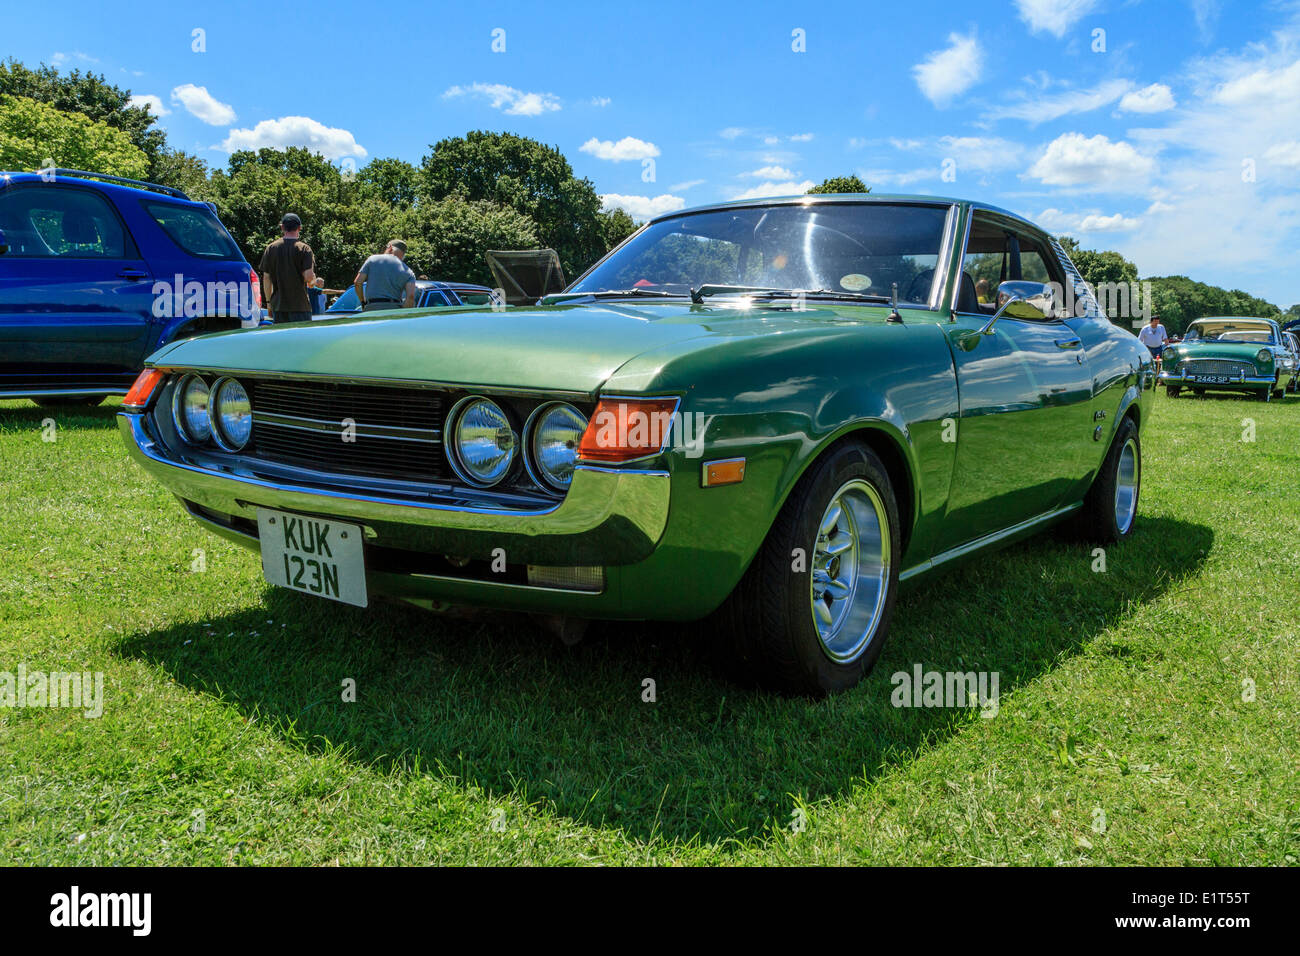 1970s Toyota Celica at classic car show Stock Photo